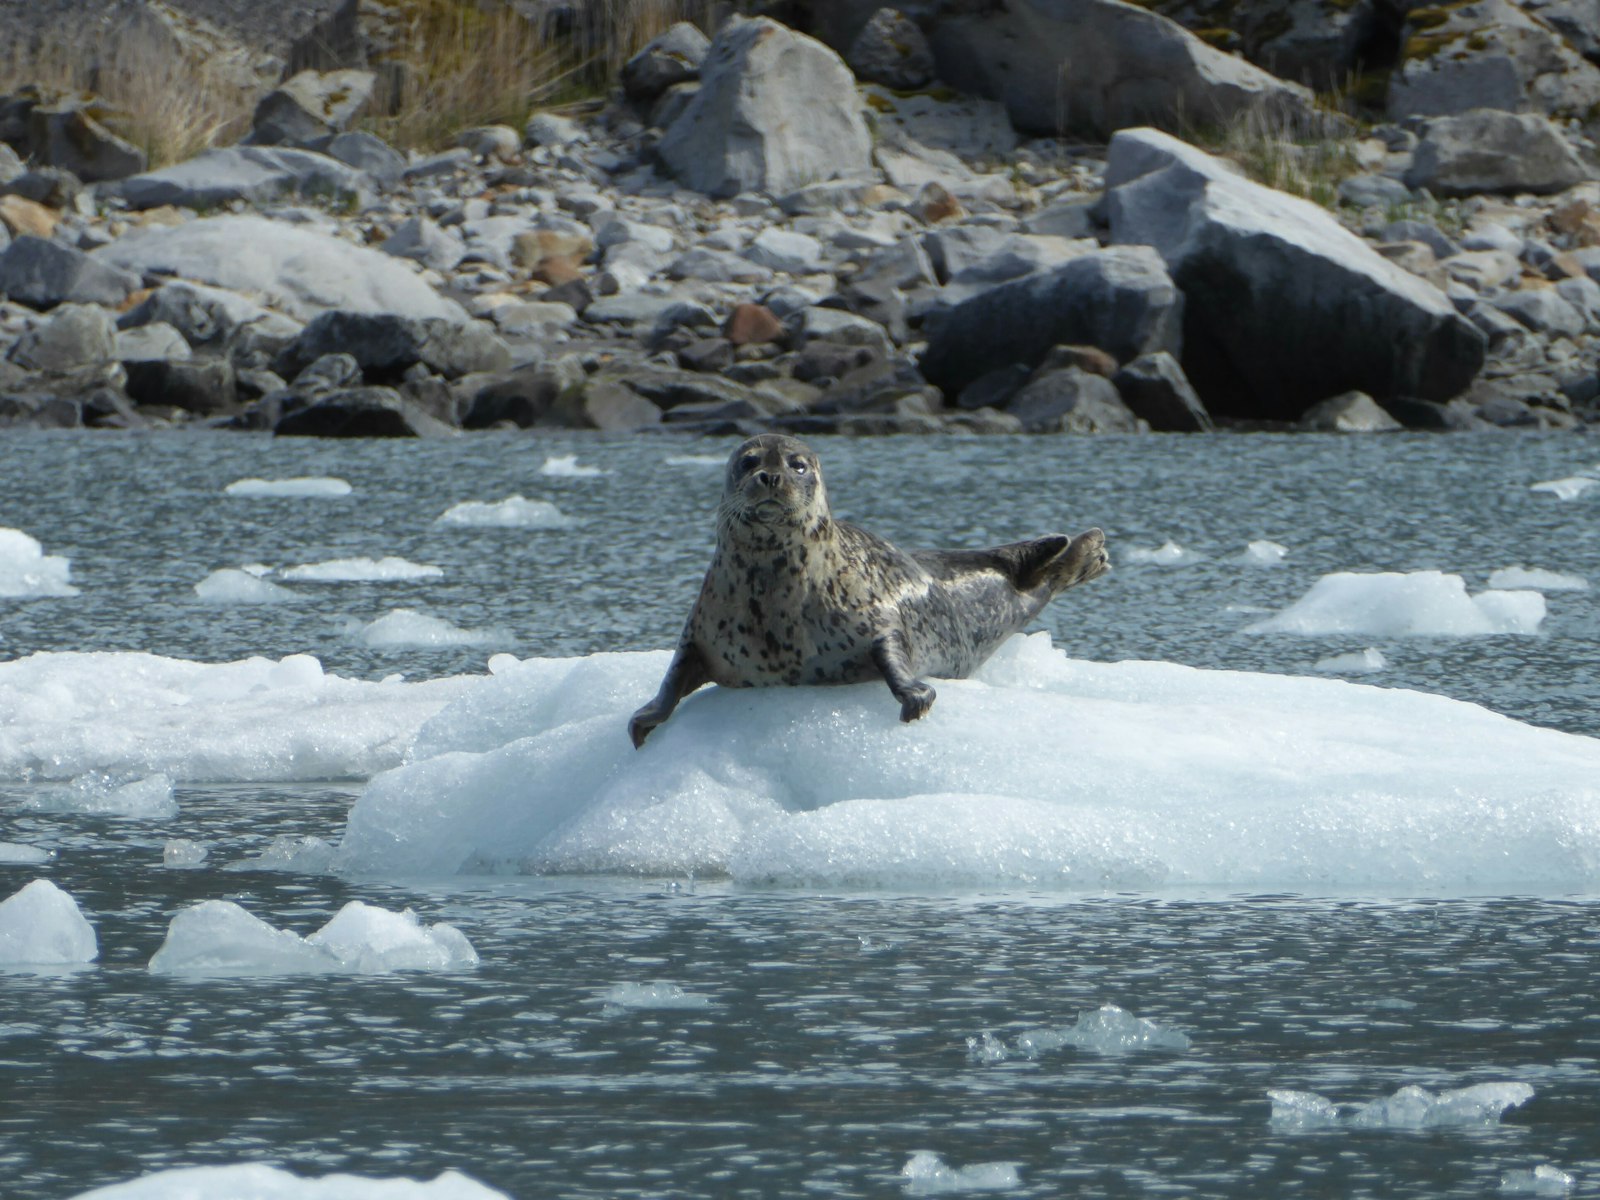 A harbor seal sitting on a chunk of ice floating in the water.